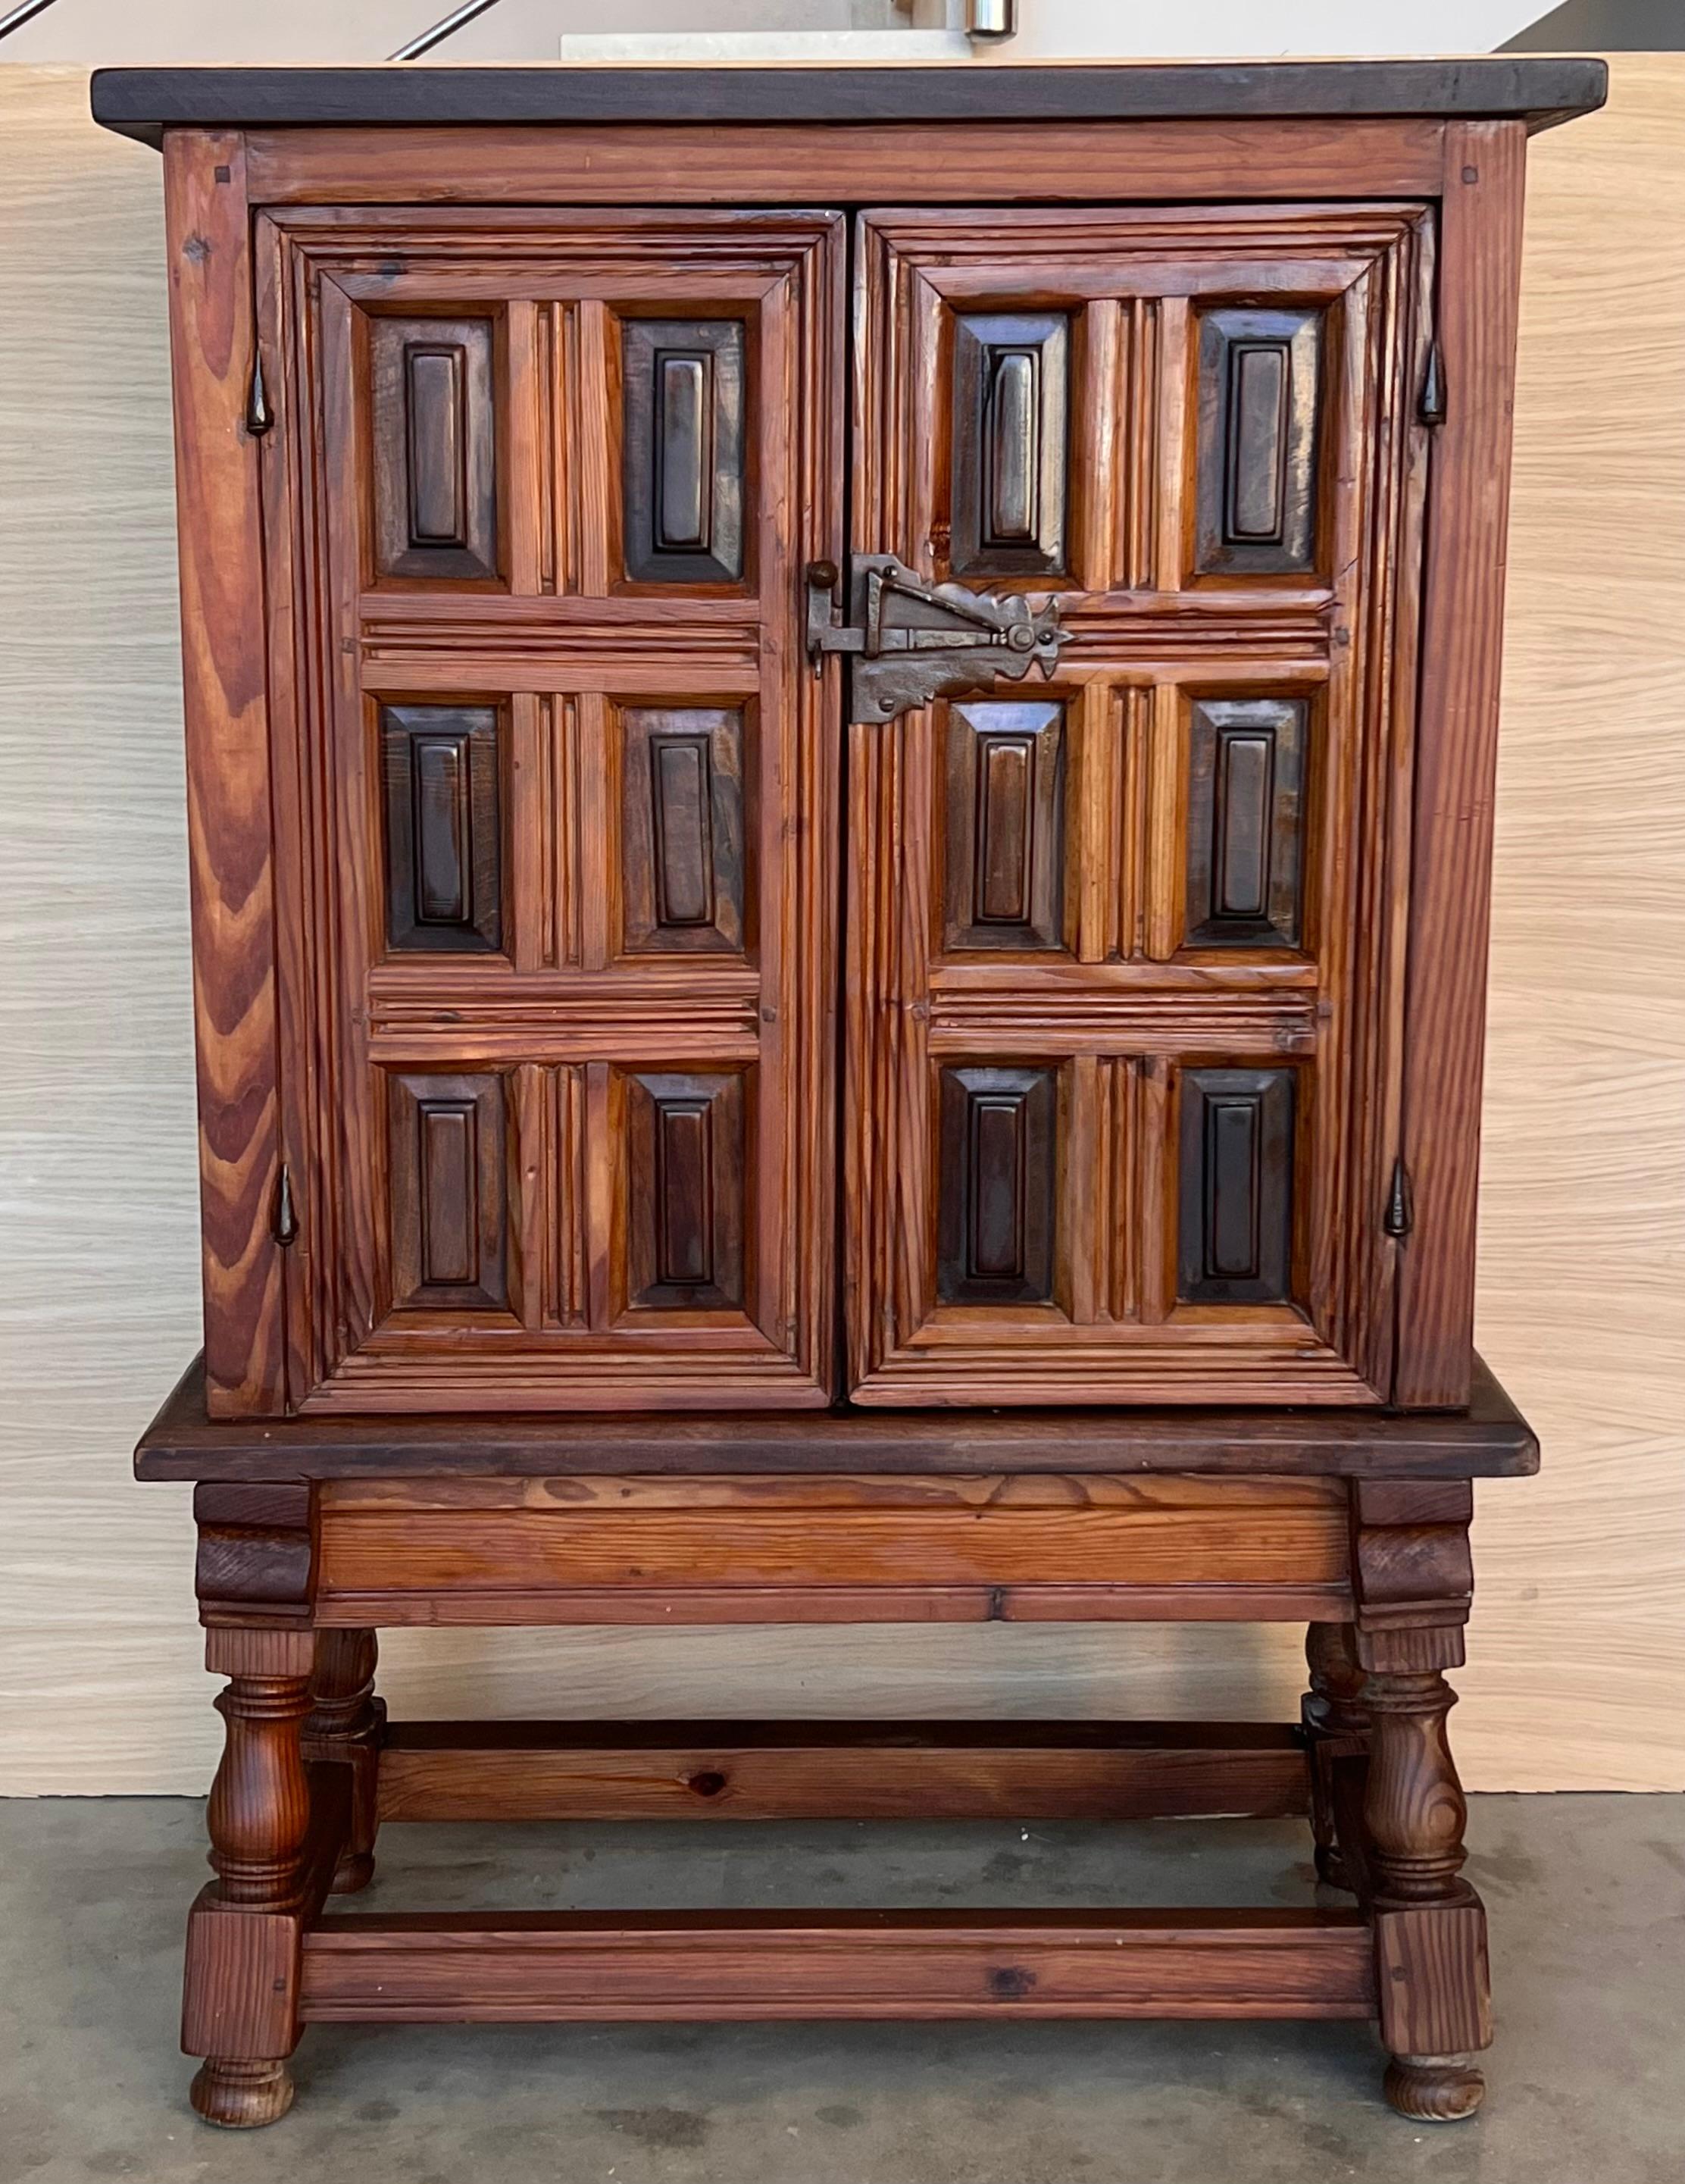 19th Catalan Spanish Baroque carved walnut Tuscan two door cabinet.

From the north of Spain, built in solid walnut, the rectangular top with a molded edge on a box that fits into two solid walnut paneled doors with one shelve inside and raised on